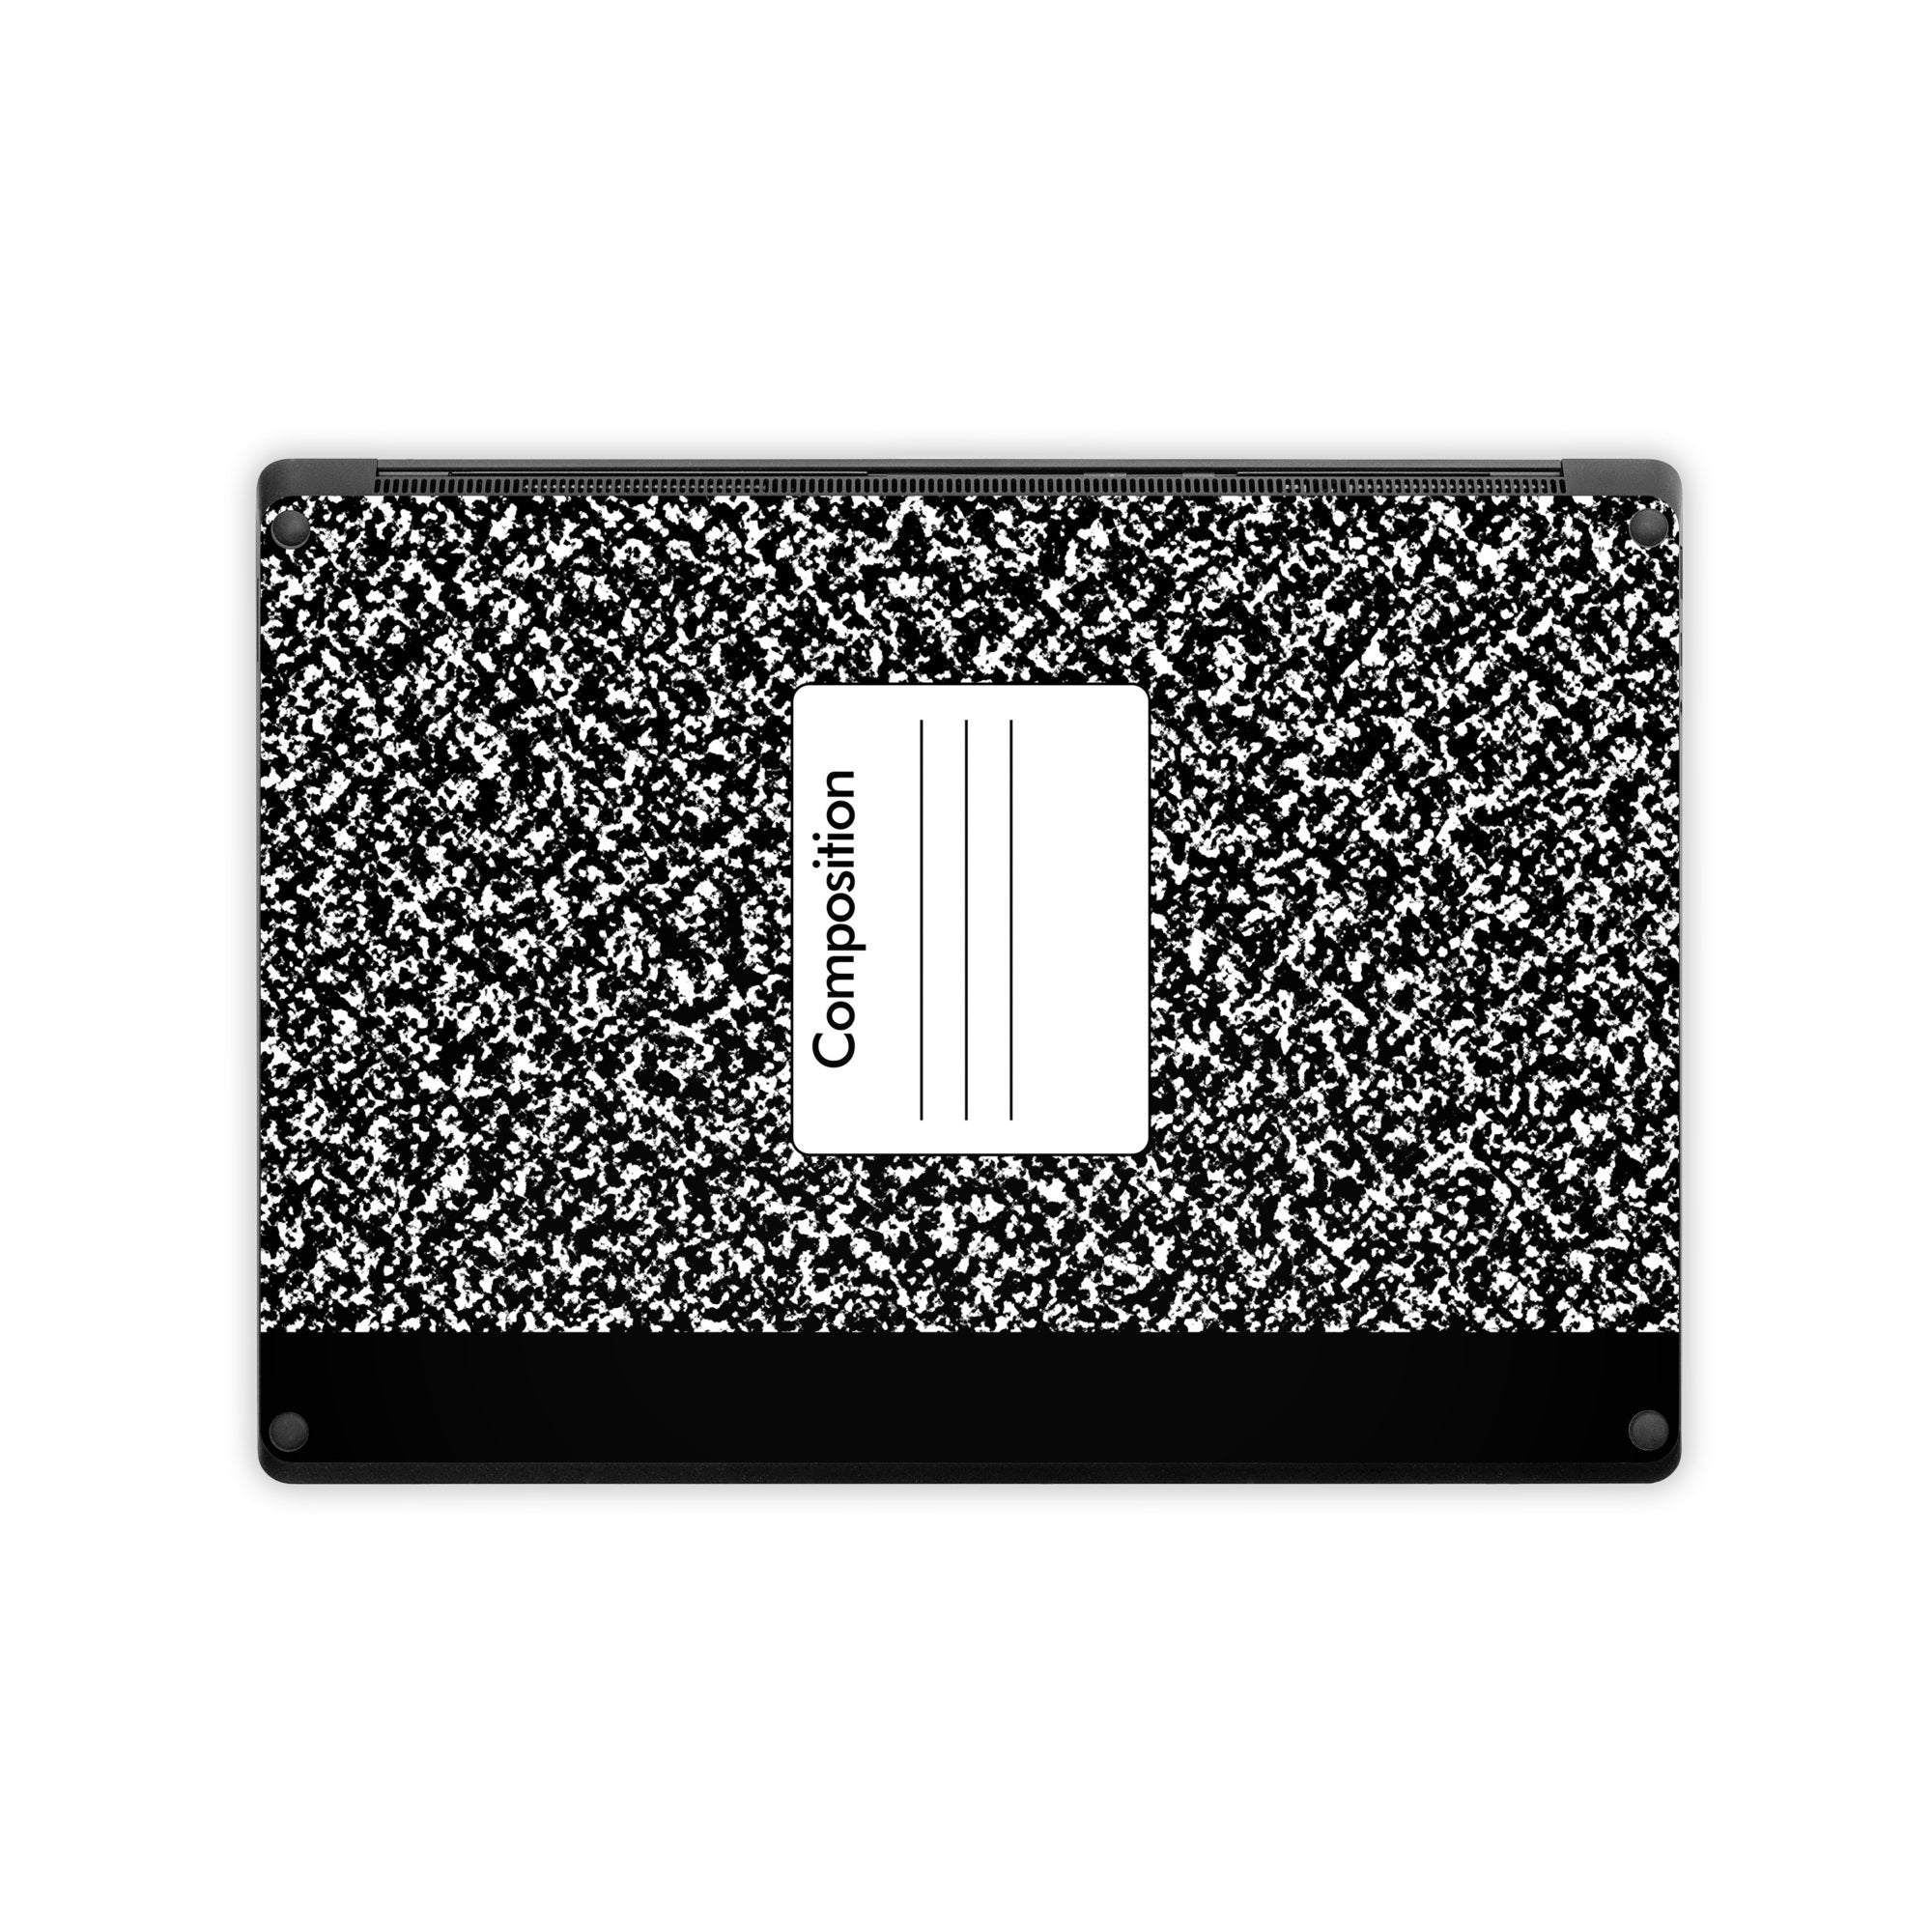 Composition Notebook - Microsoft Surface Laptop Skin